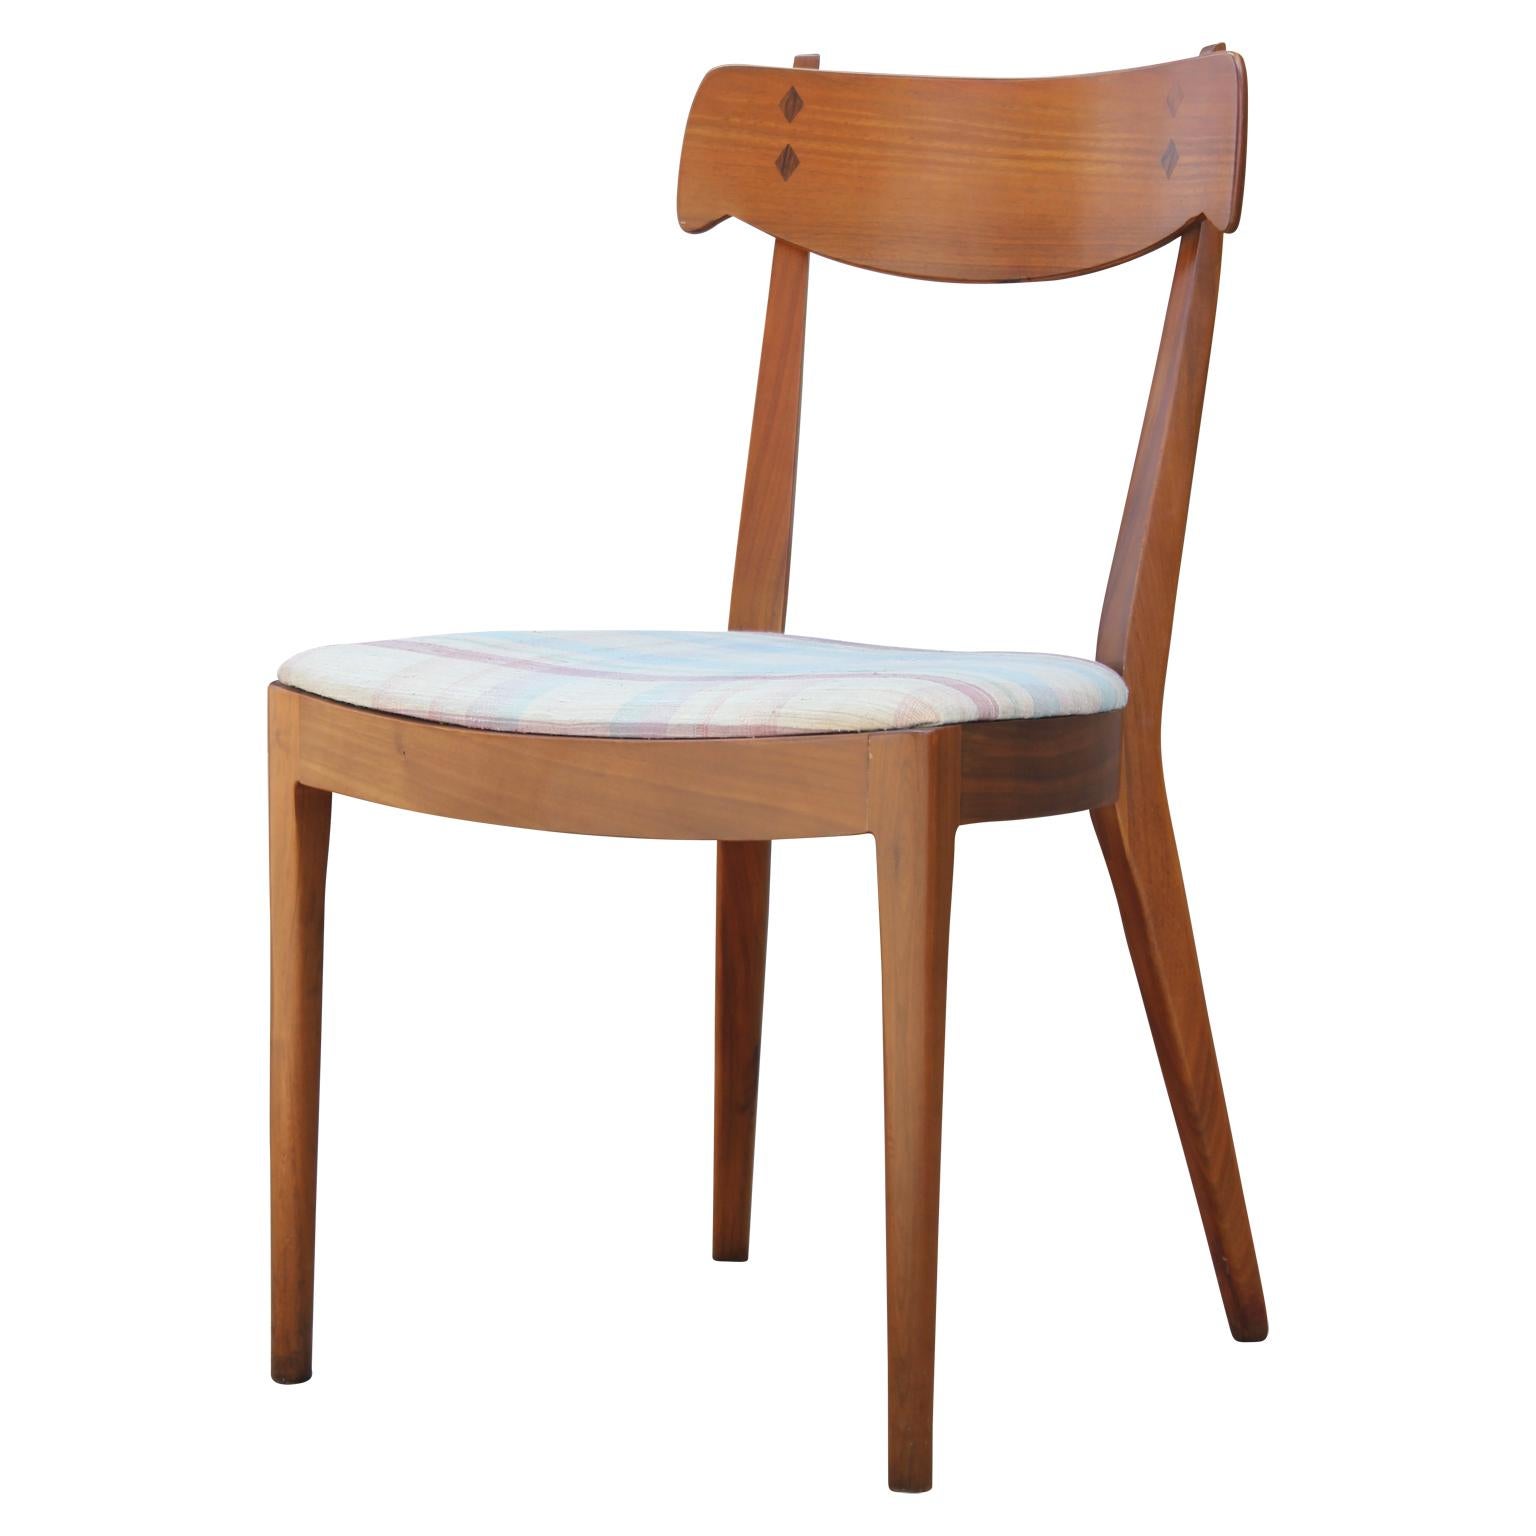 Wonderful Mid-Century Modern set of eight Danish style dining chairs designed by Stewart MacDougall and Kipp Stewart for Drexel's Declaration line. Made from gorgeous walnut with rosewood inlays. Features six armless chairs and two end chairs with